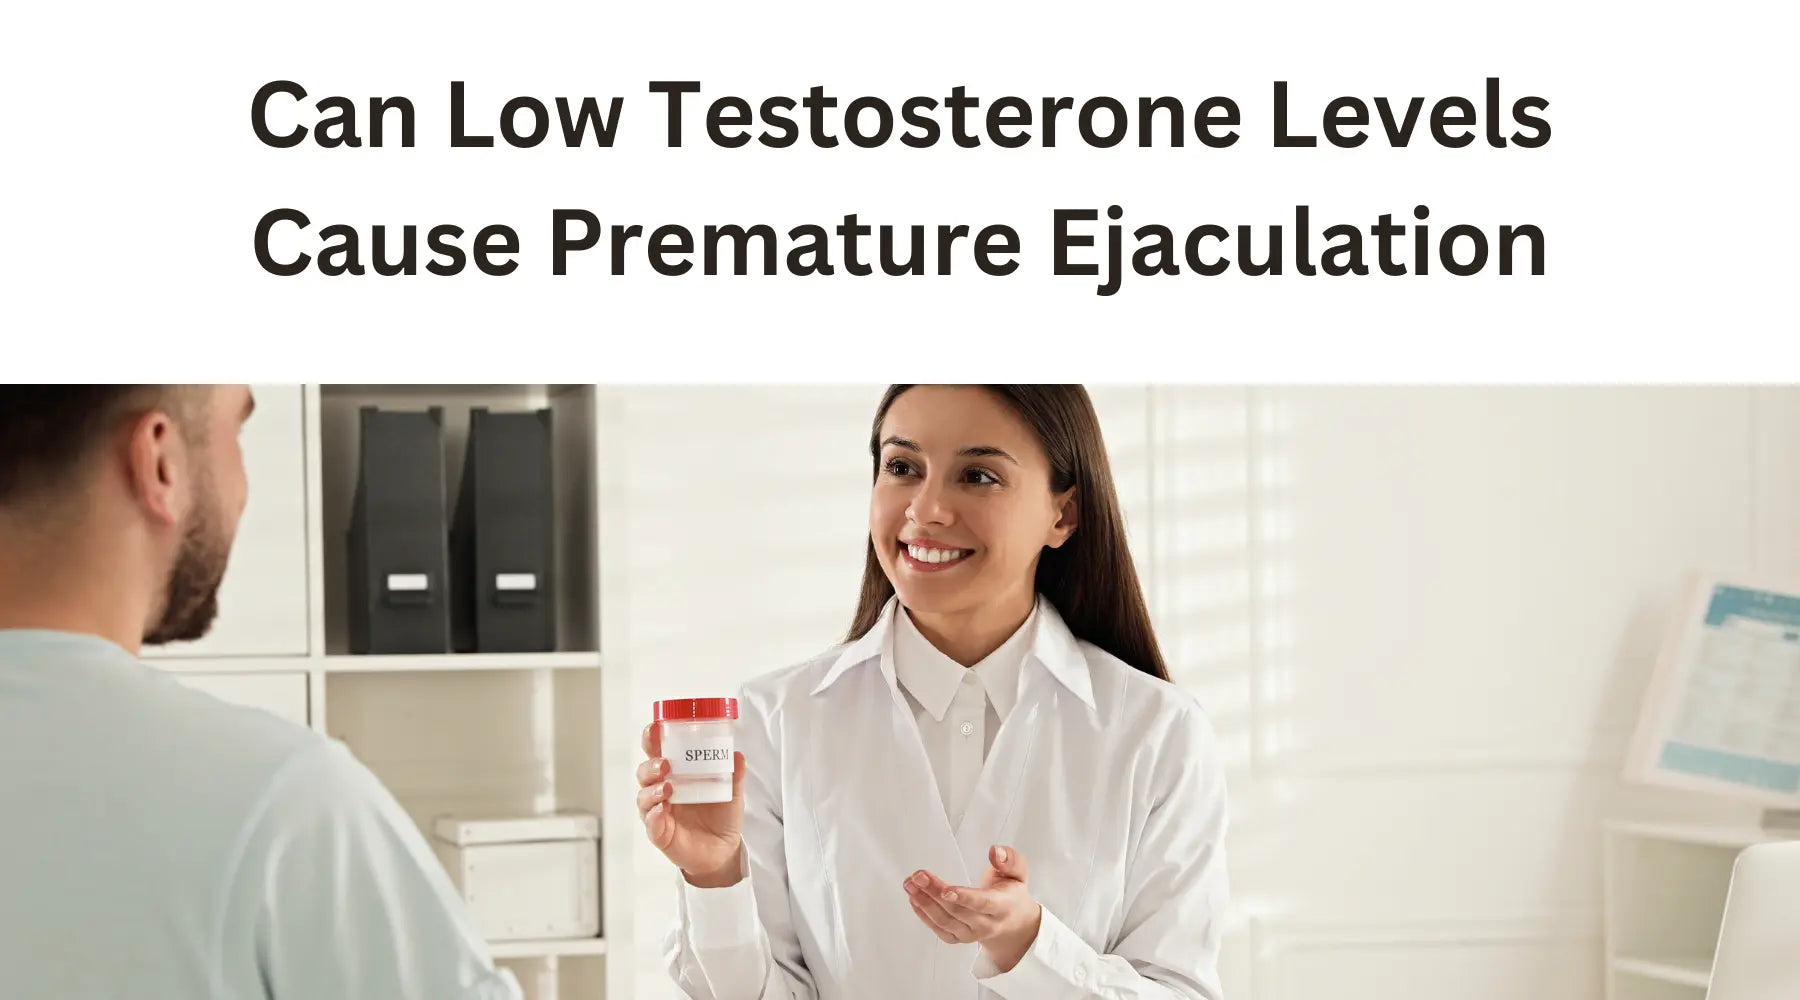 Can Low Testosterone Levels Cause Premature Ejaculation